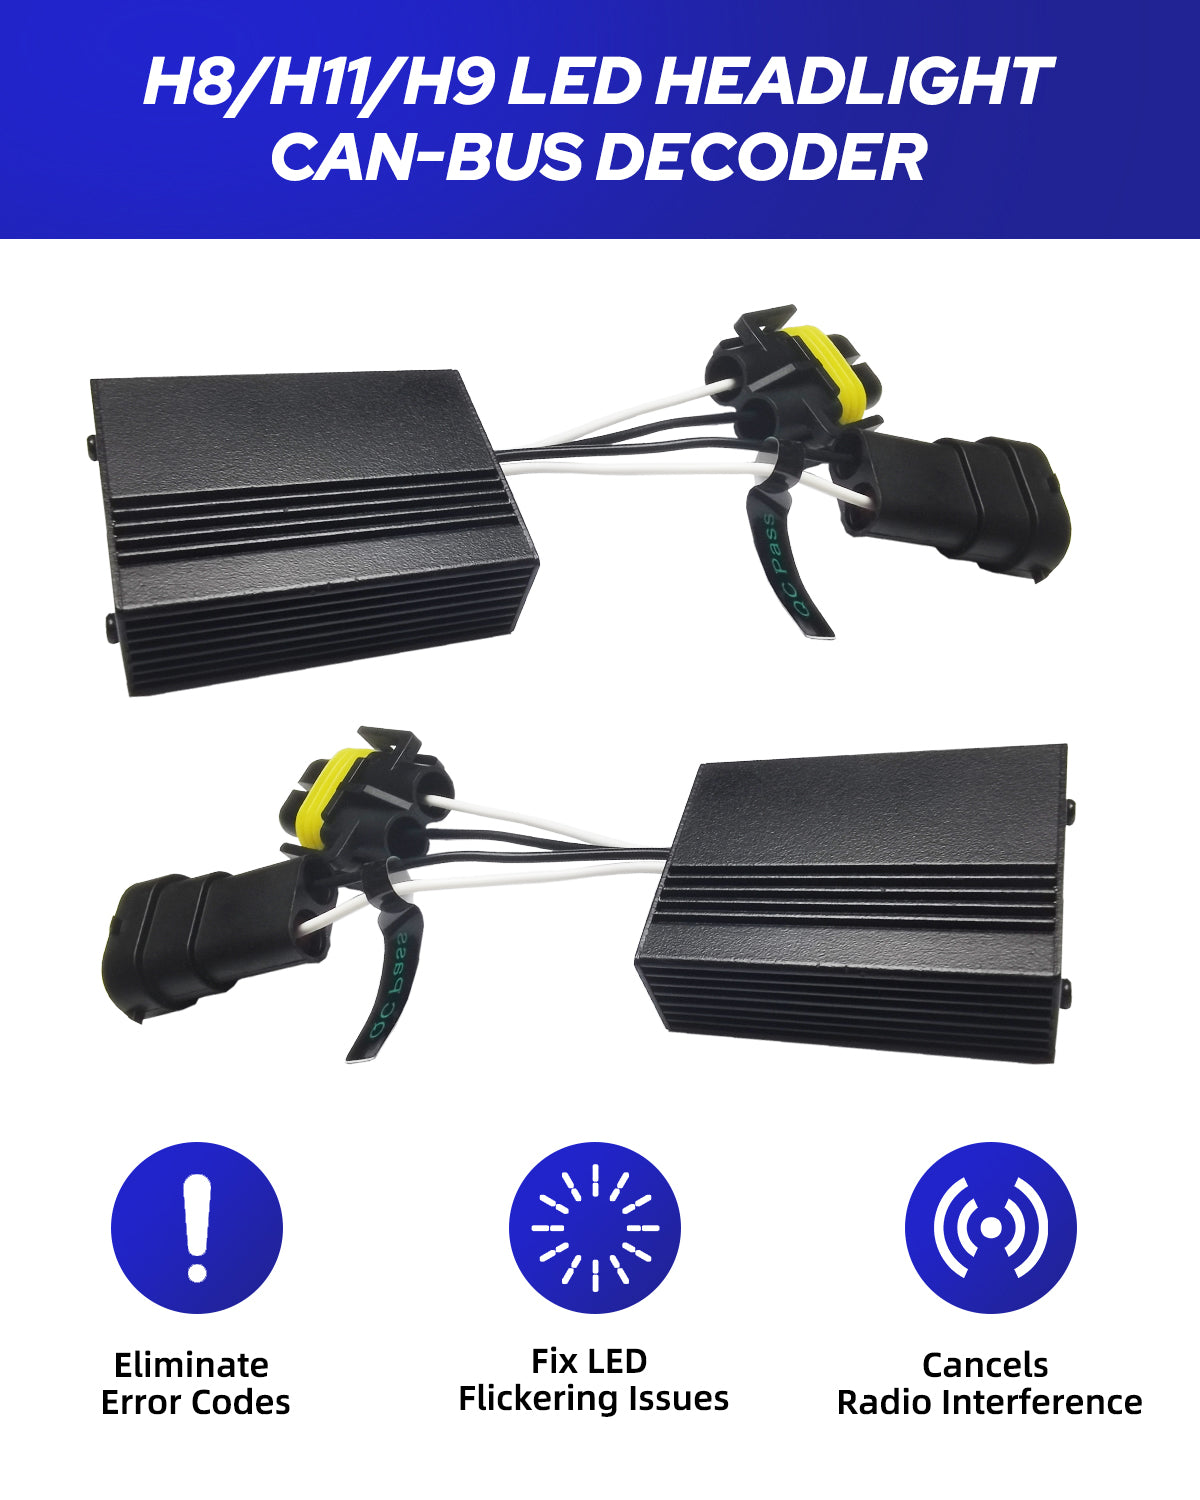 CANBUS DECODER FOR H11 LED HEADLIGHTS